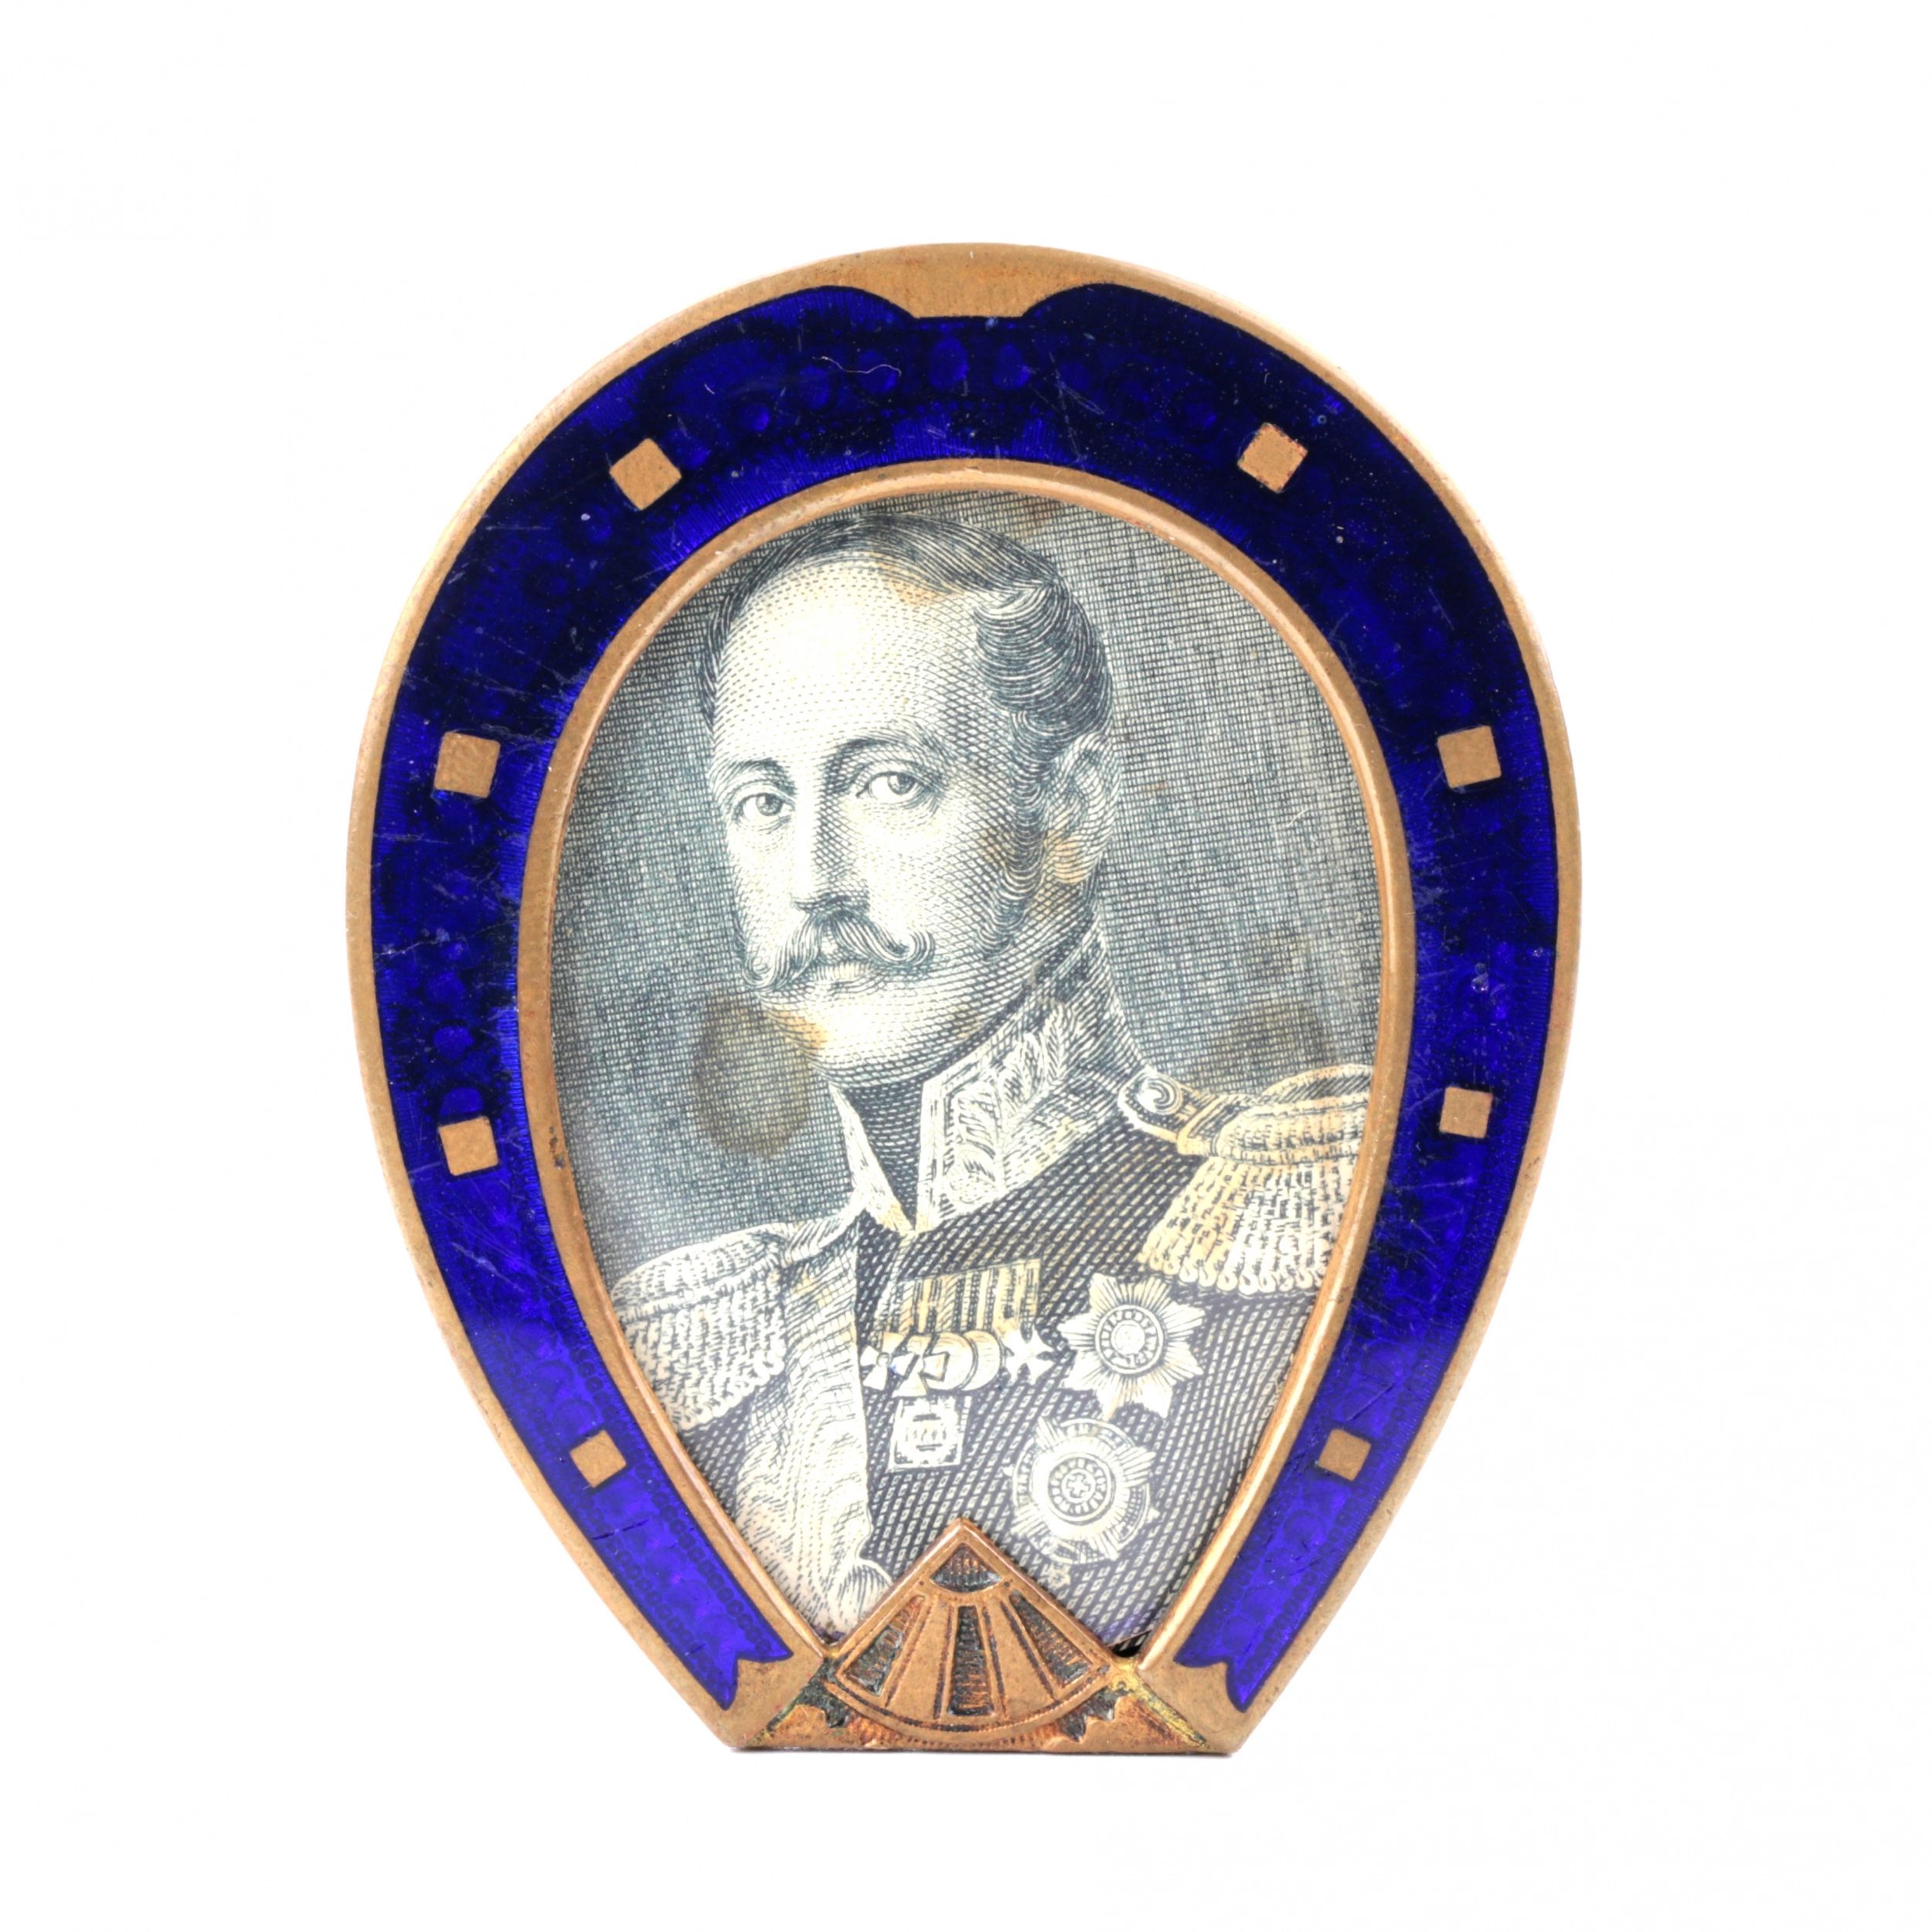 Photo-frame-in-the-shape-of-a-horseshoe-with-blue-enamel-from-the-late-19th-century-